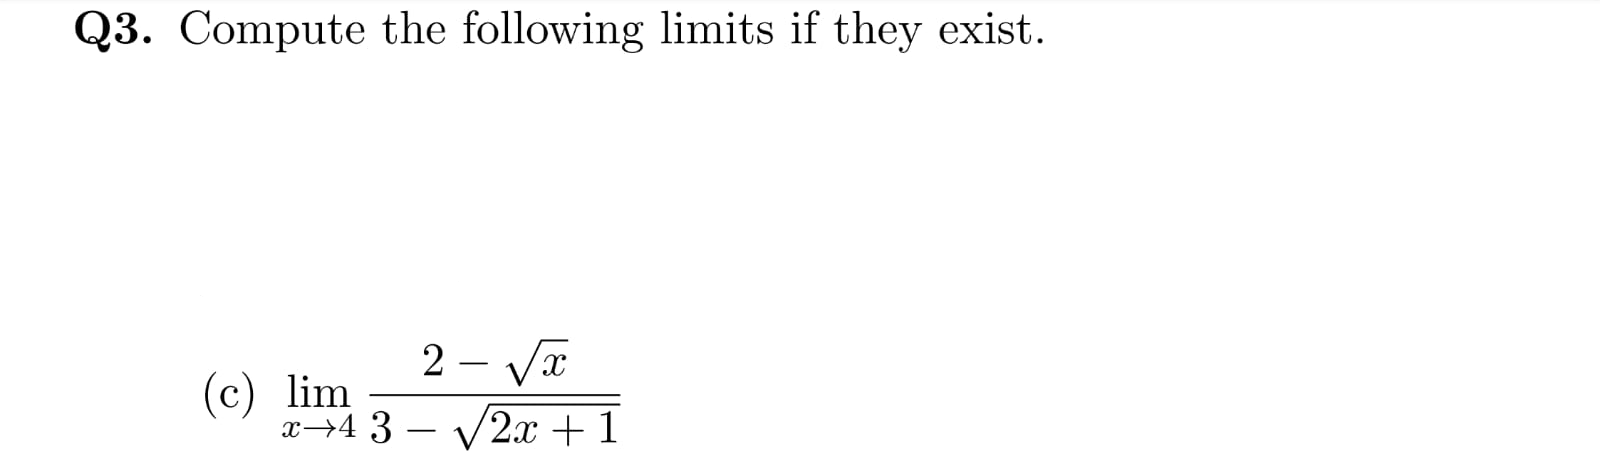 Q3. Compute the following limits if they exist.
2 – Vx
(c) lim
x→4 3 – V2x + 1
-
